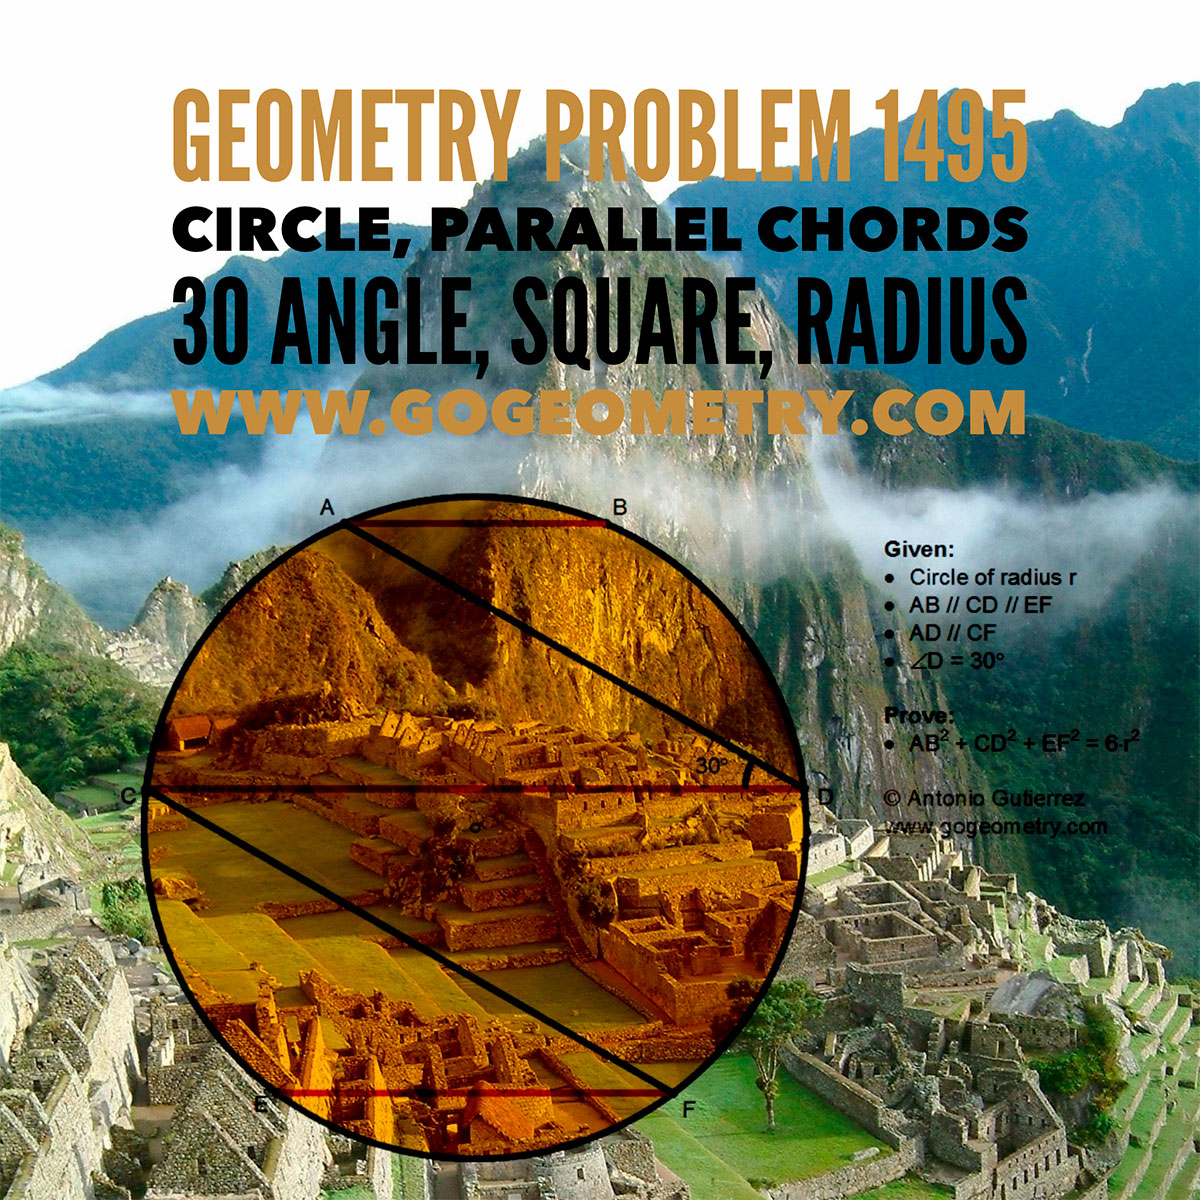 Geometry Problem 1495: Circle, Parallel Chords, 30 Degree Angle, Square, Machu Picchu in the background